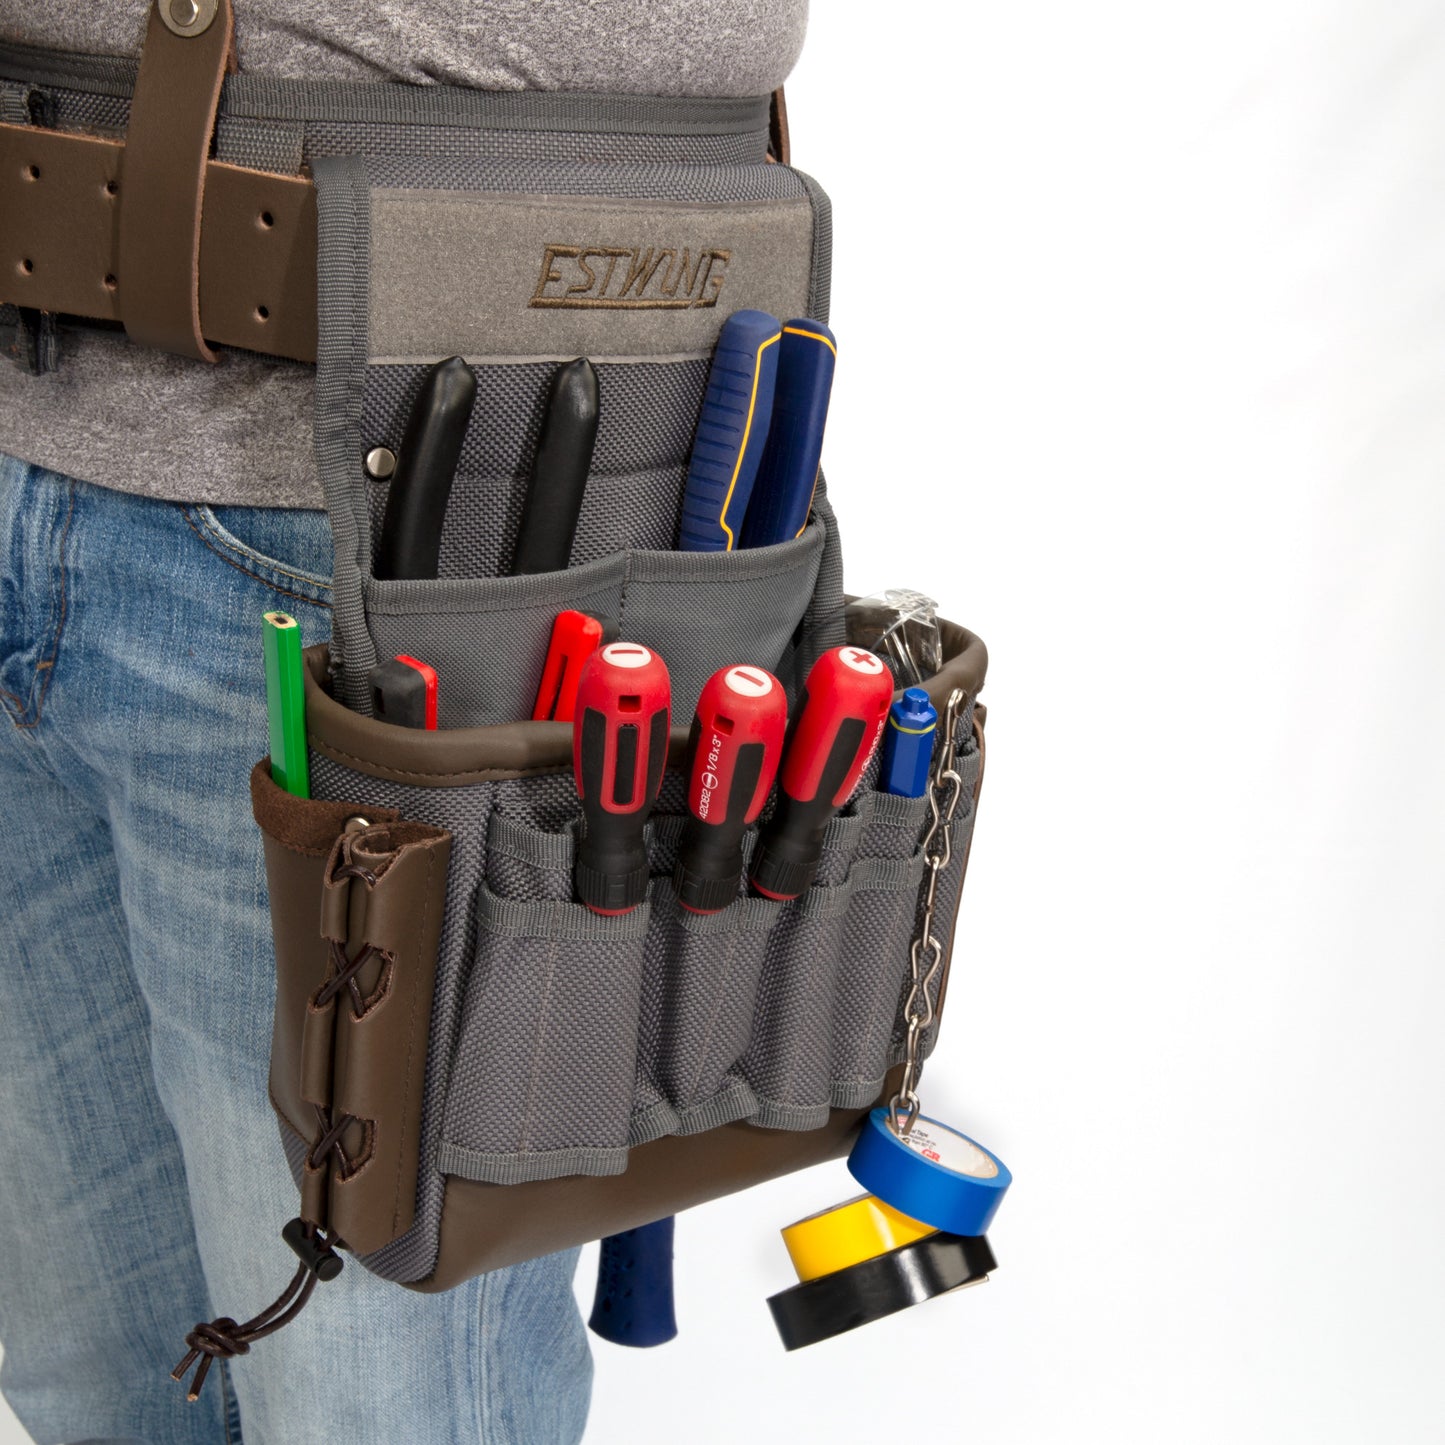 13 Pocket Electrician's Tool Rig